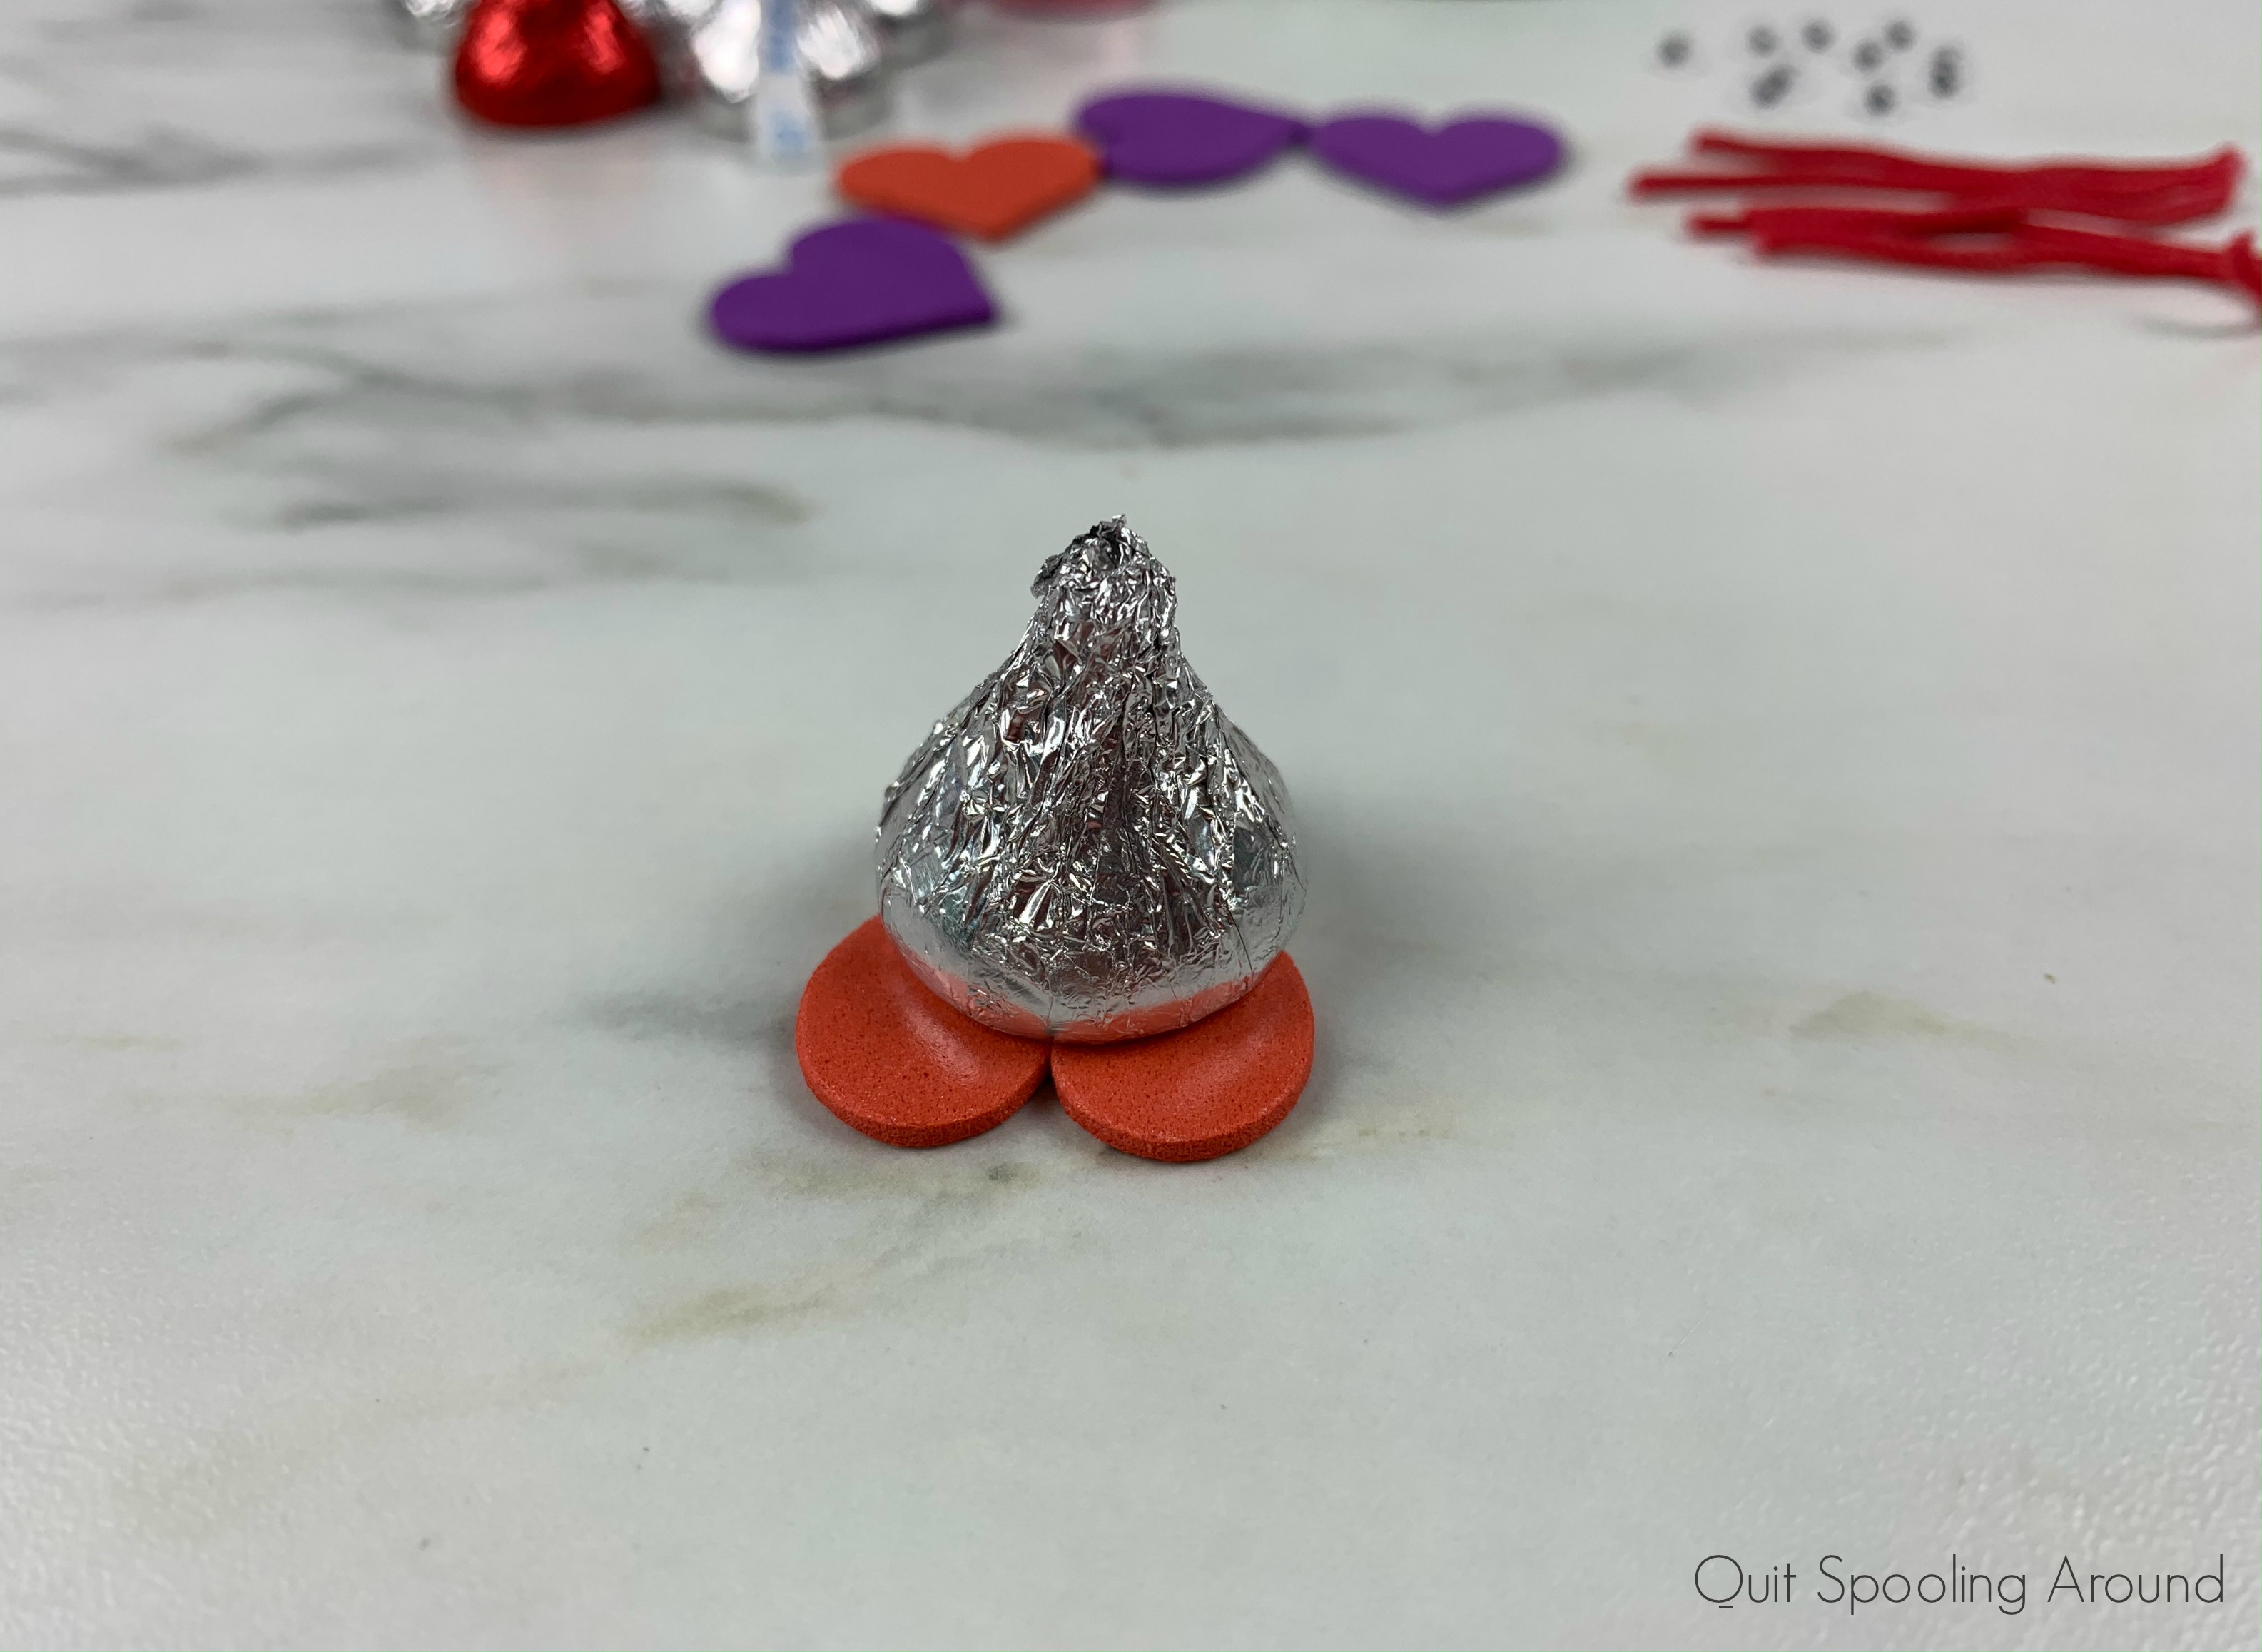 Attach heart to Hershey's Kiss